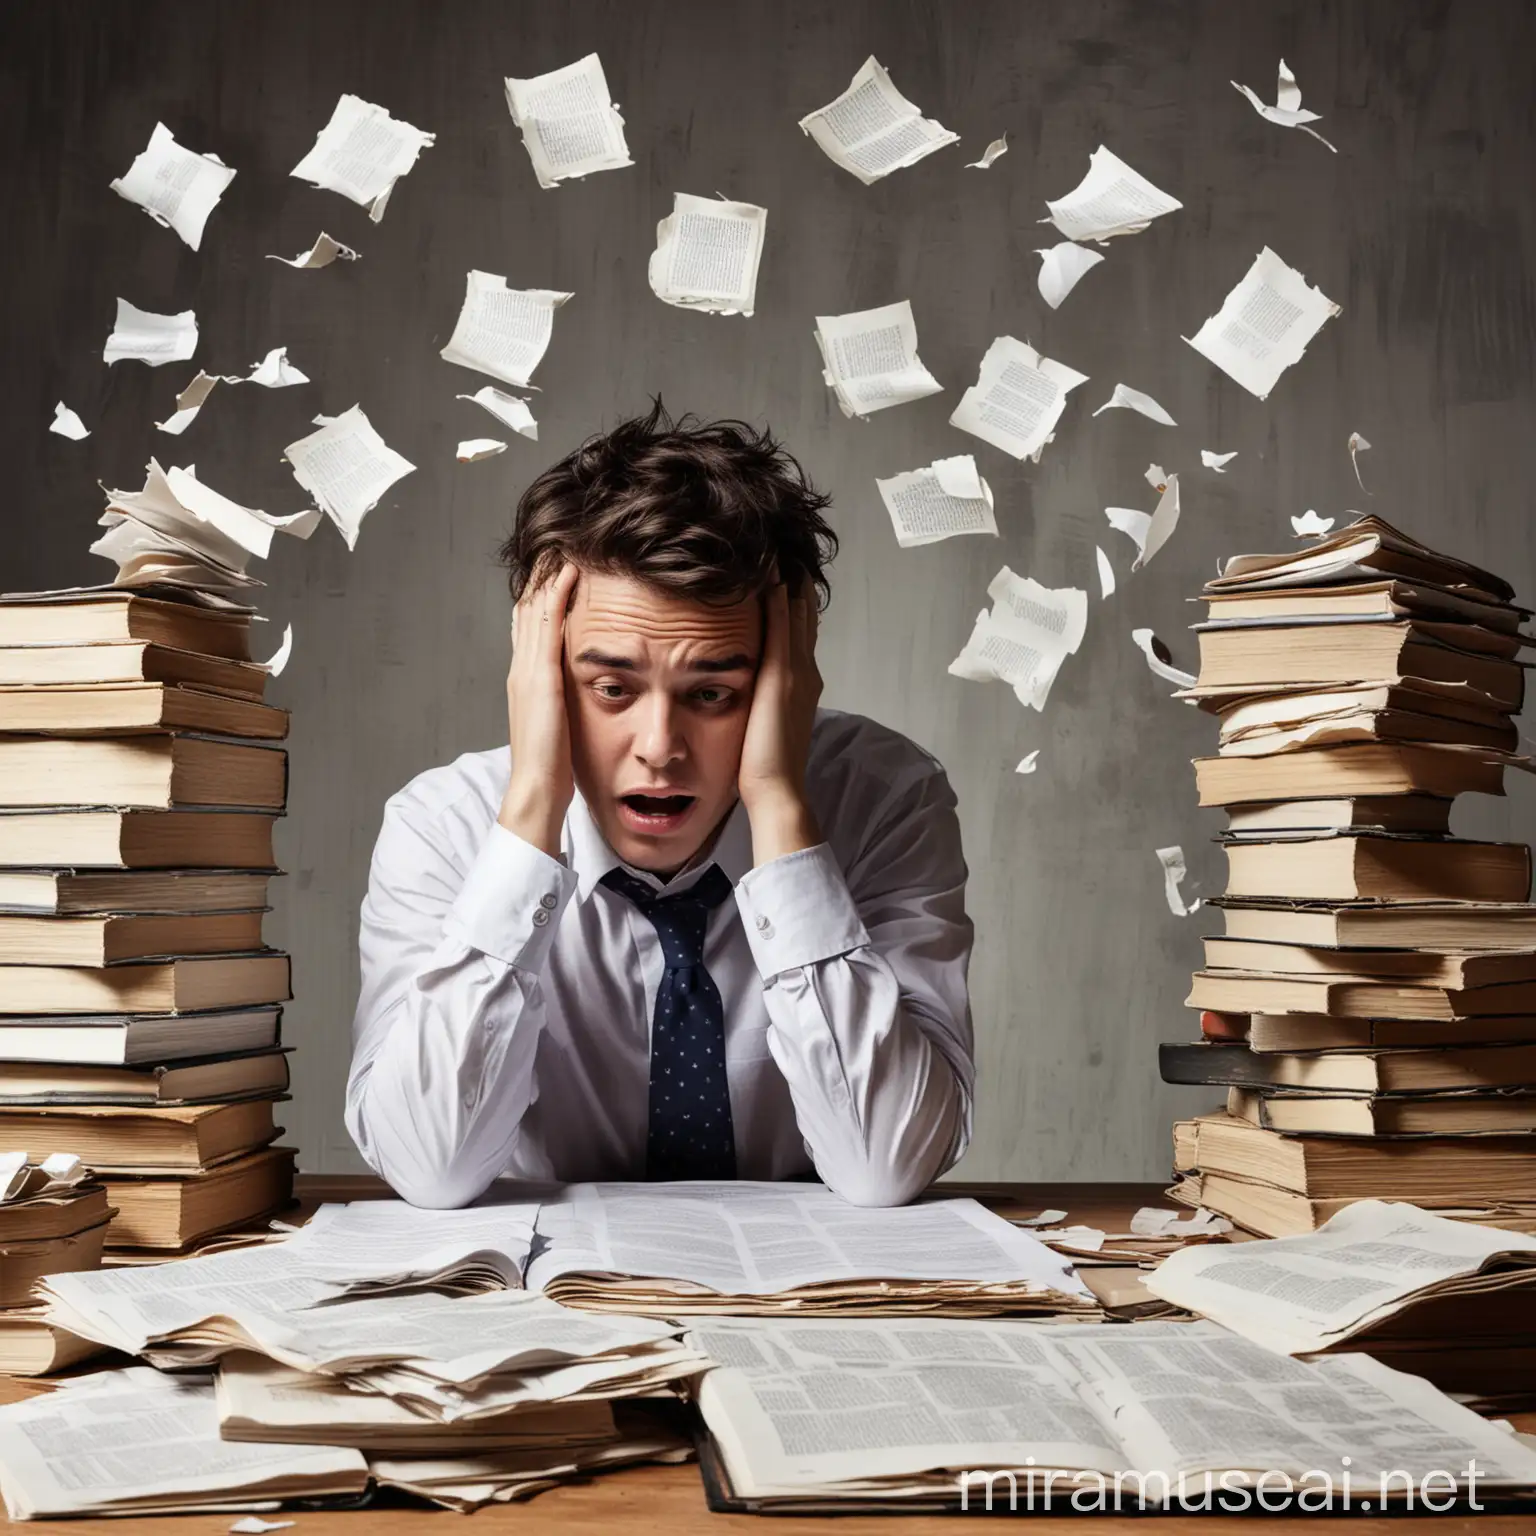 Overwhelmed Student at Desk Surrounded by Books and Papers